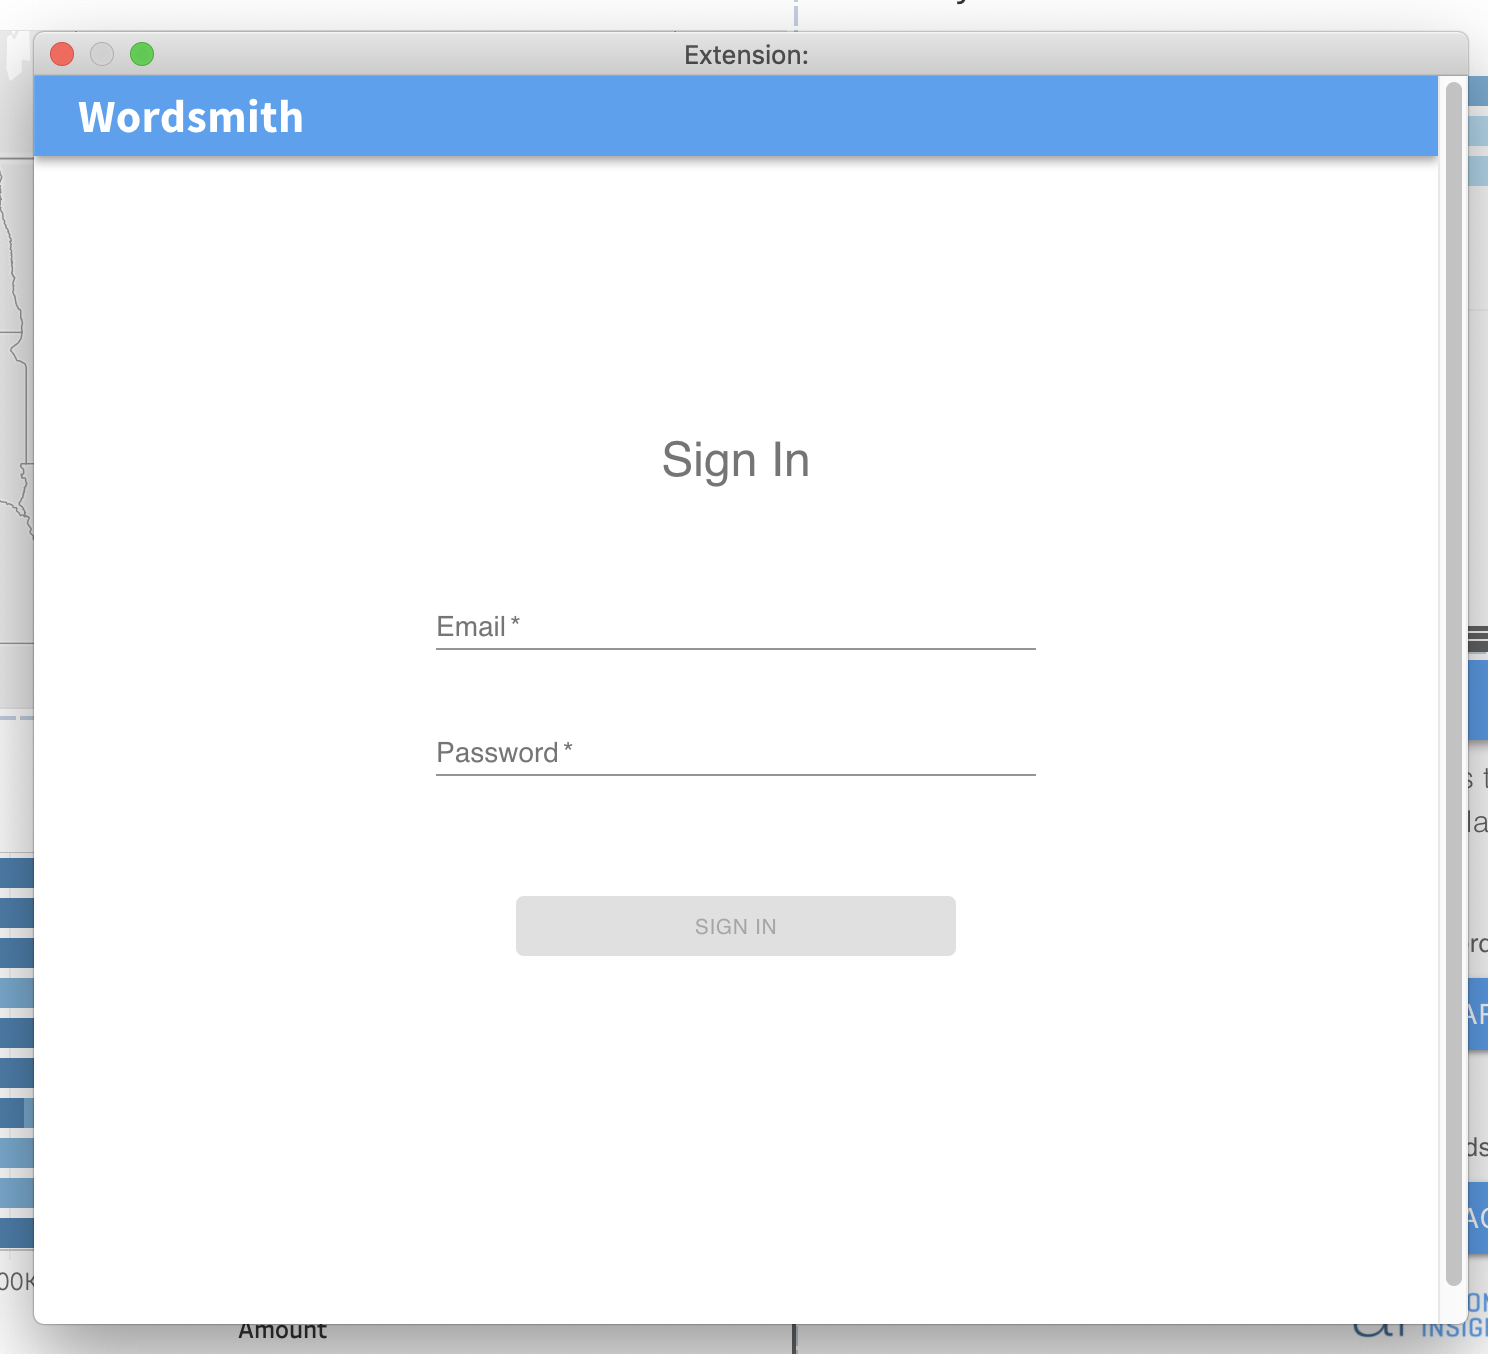 Click Connect Account to open the integration login page. Enter your Wordsmith login credentials (email and password) and click Sign In.